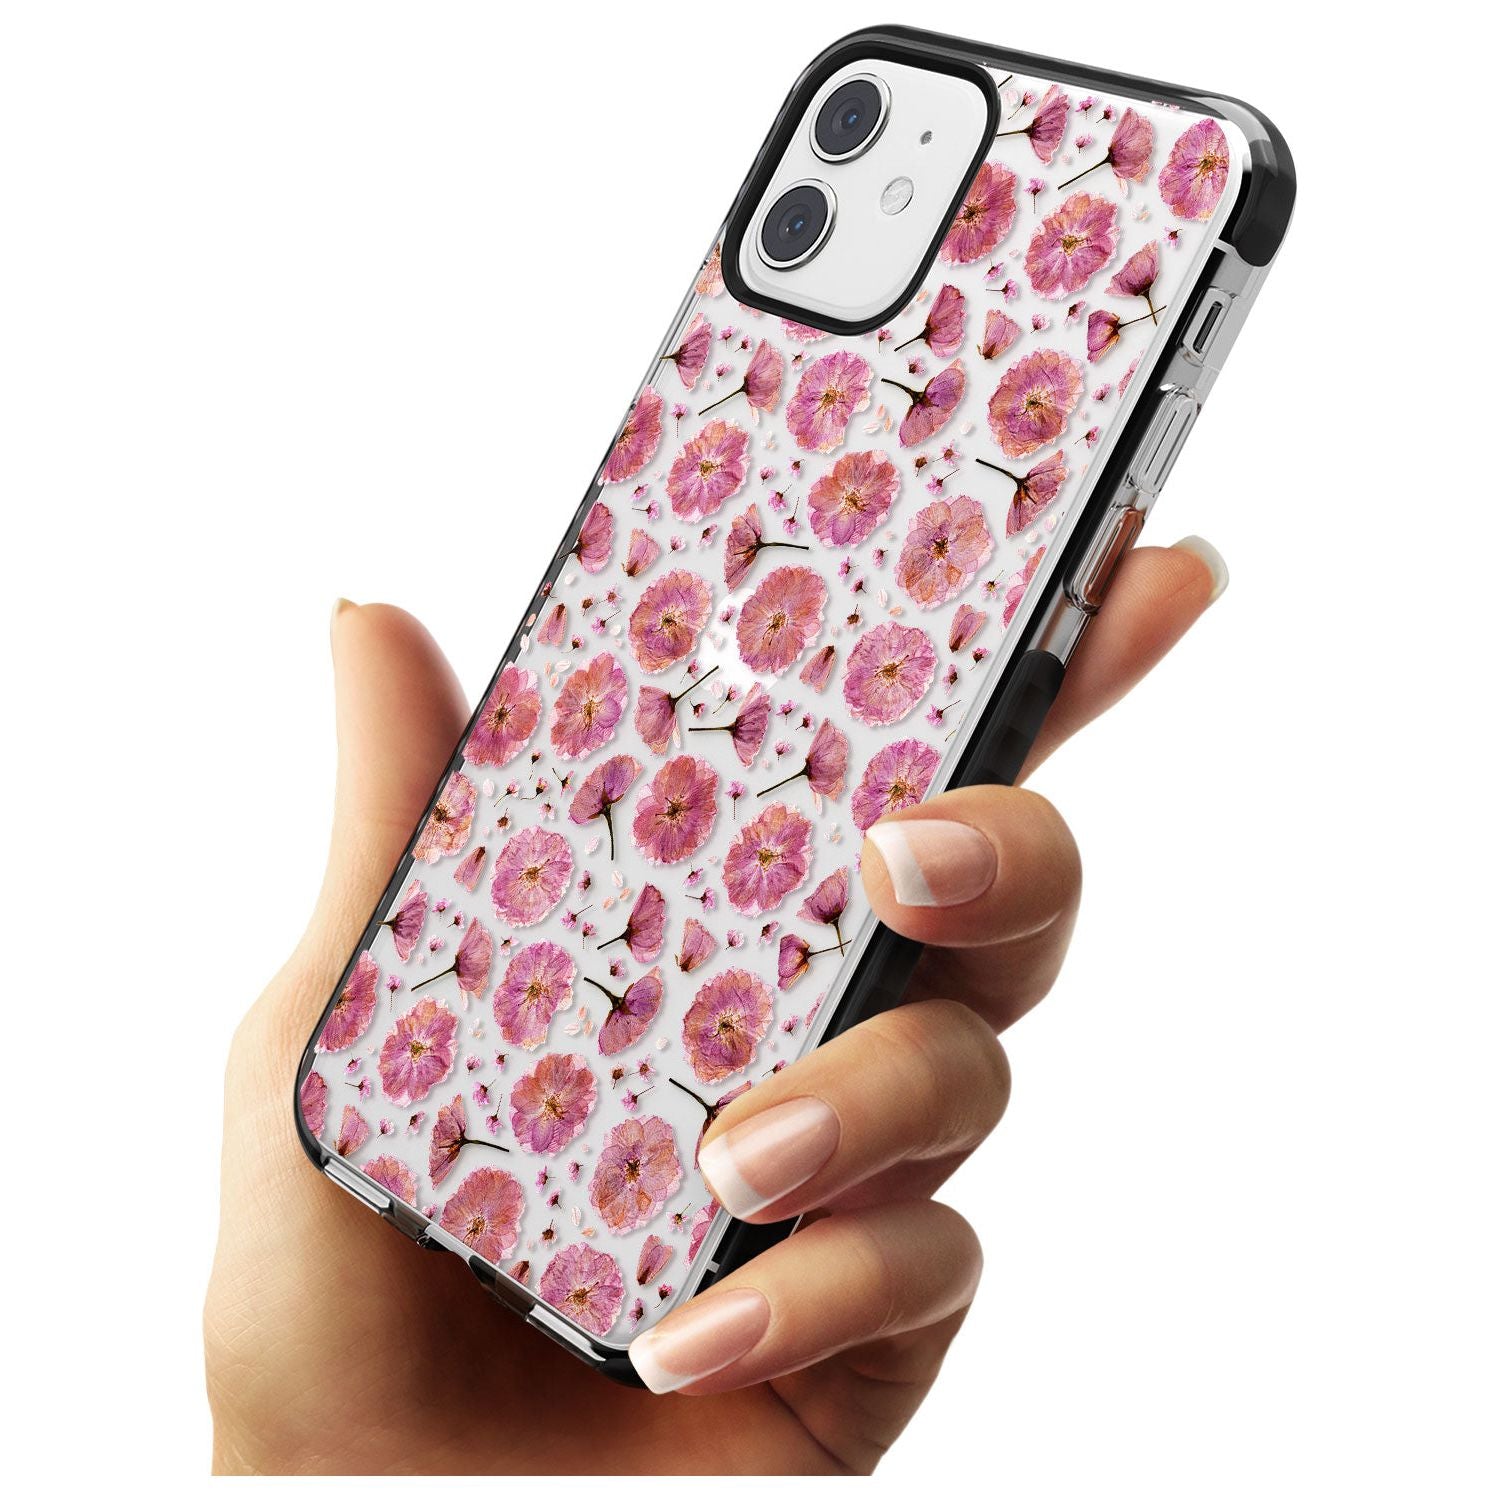 Pink Flowers & Blossoms Transparent Design Black Impact Phone Case for iPhone 11